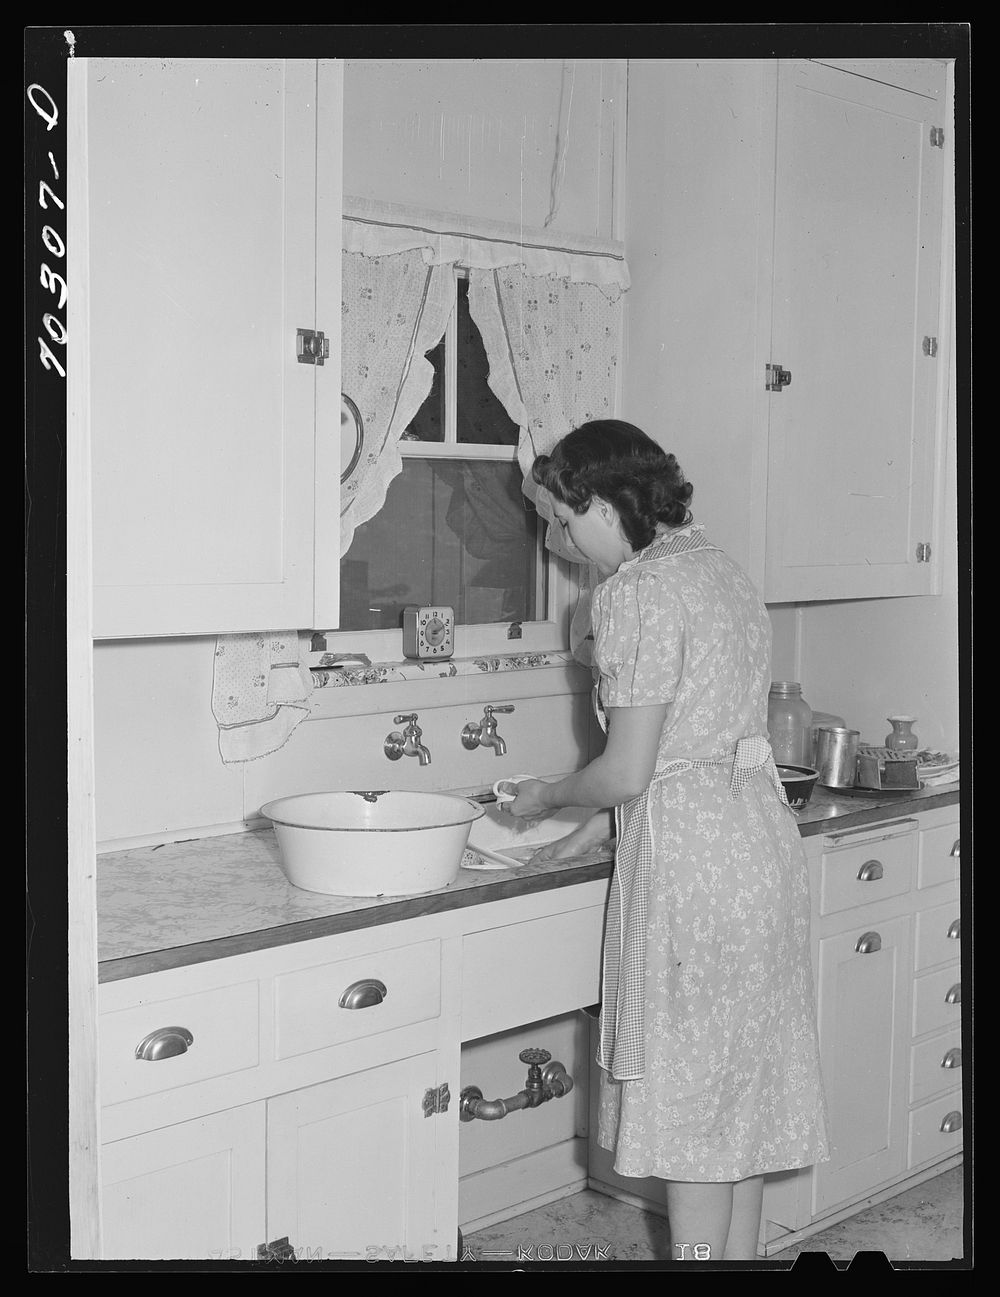 Kitchen in farm home of member of Boundary Farms, FSA (Farm Security Administration) project. Boundary County, Idaho by…